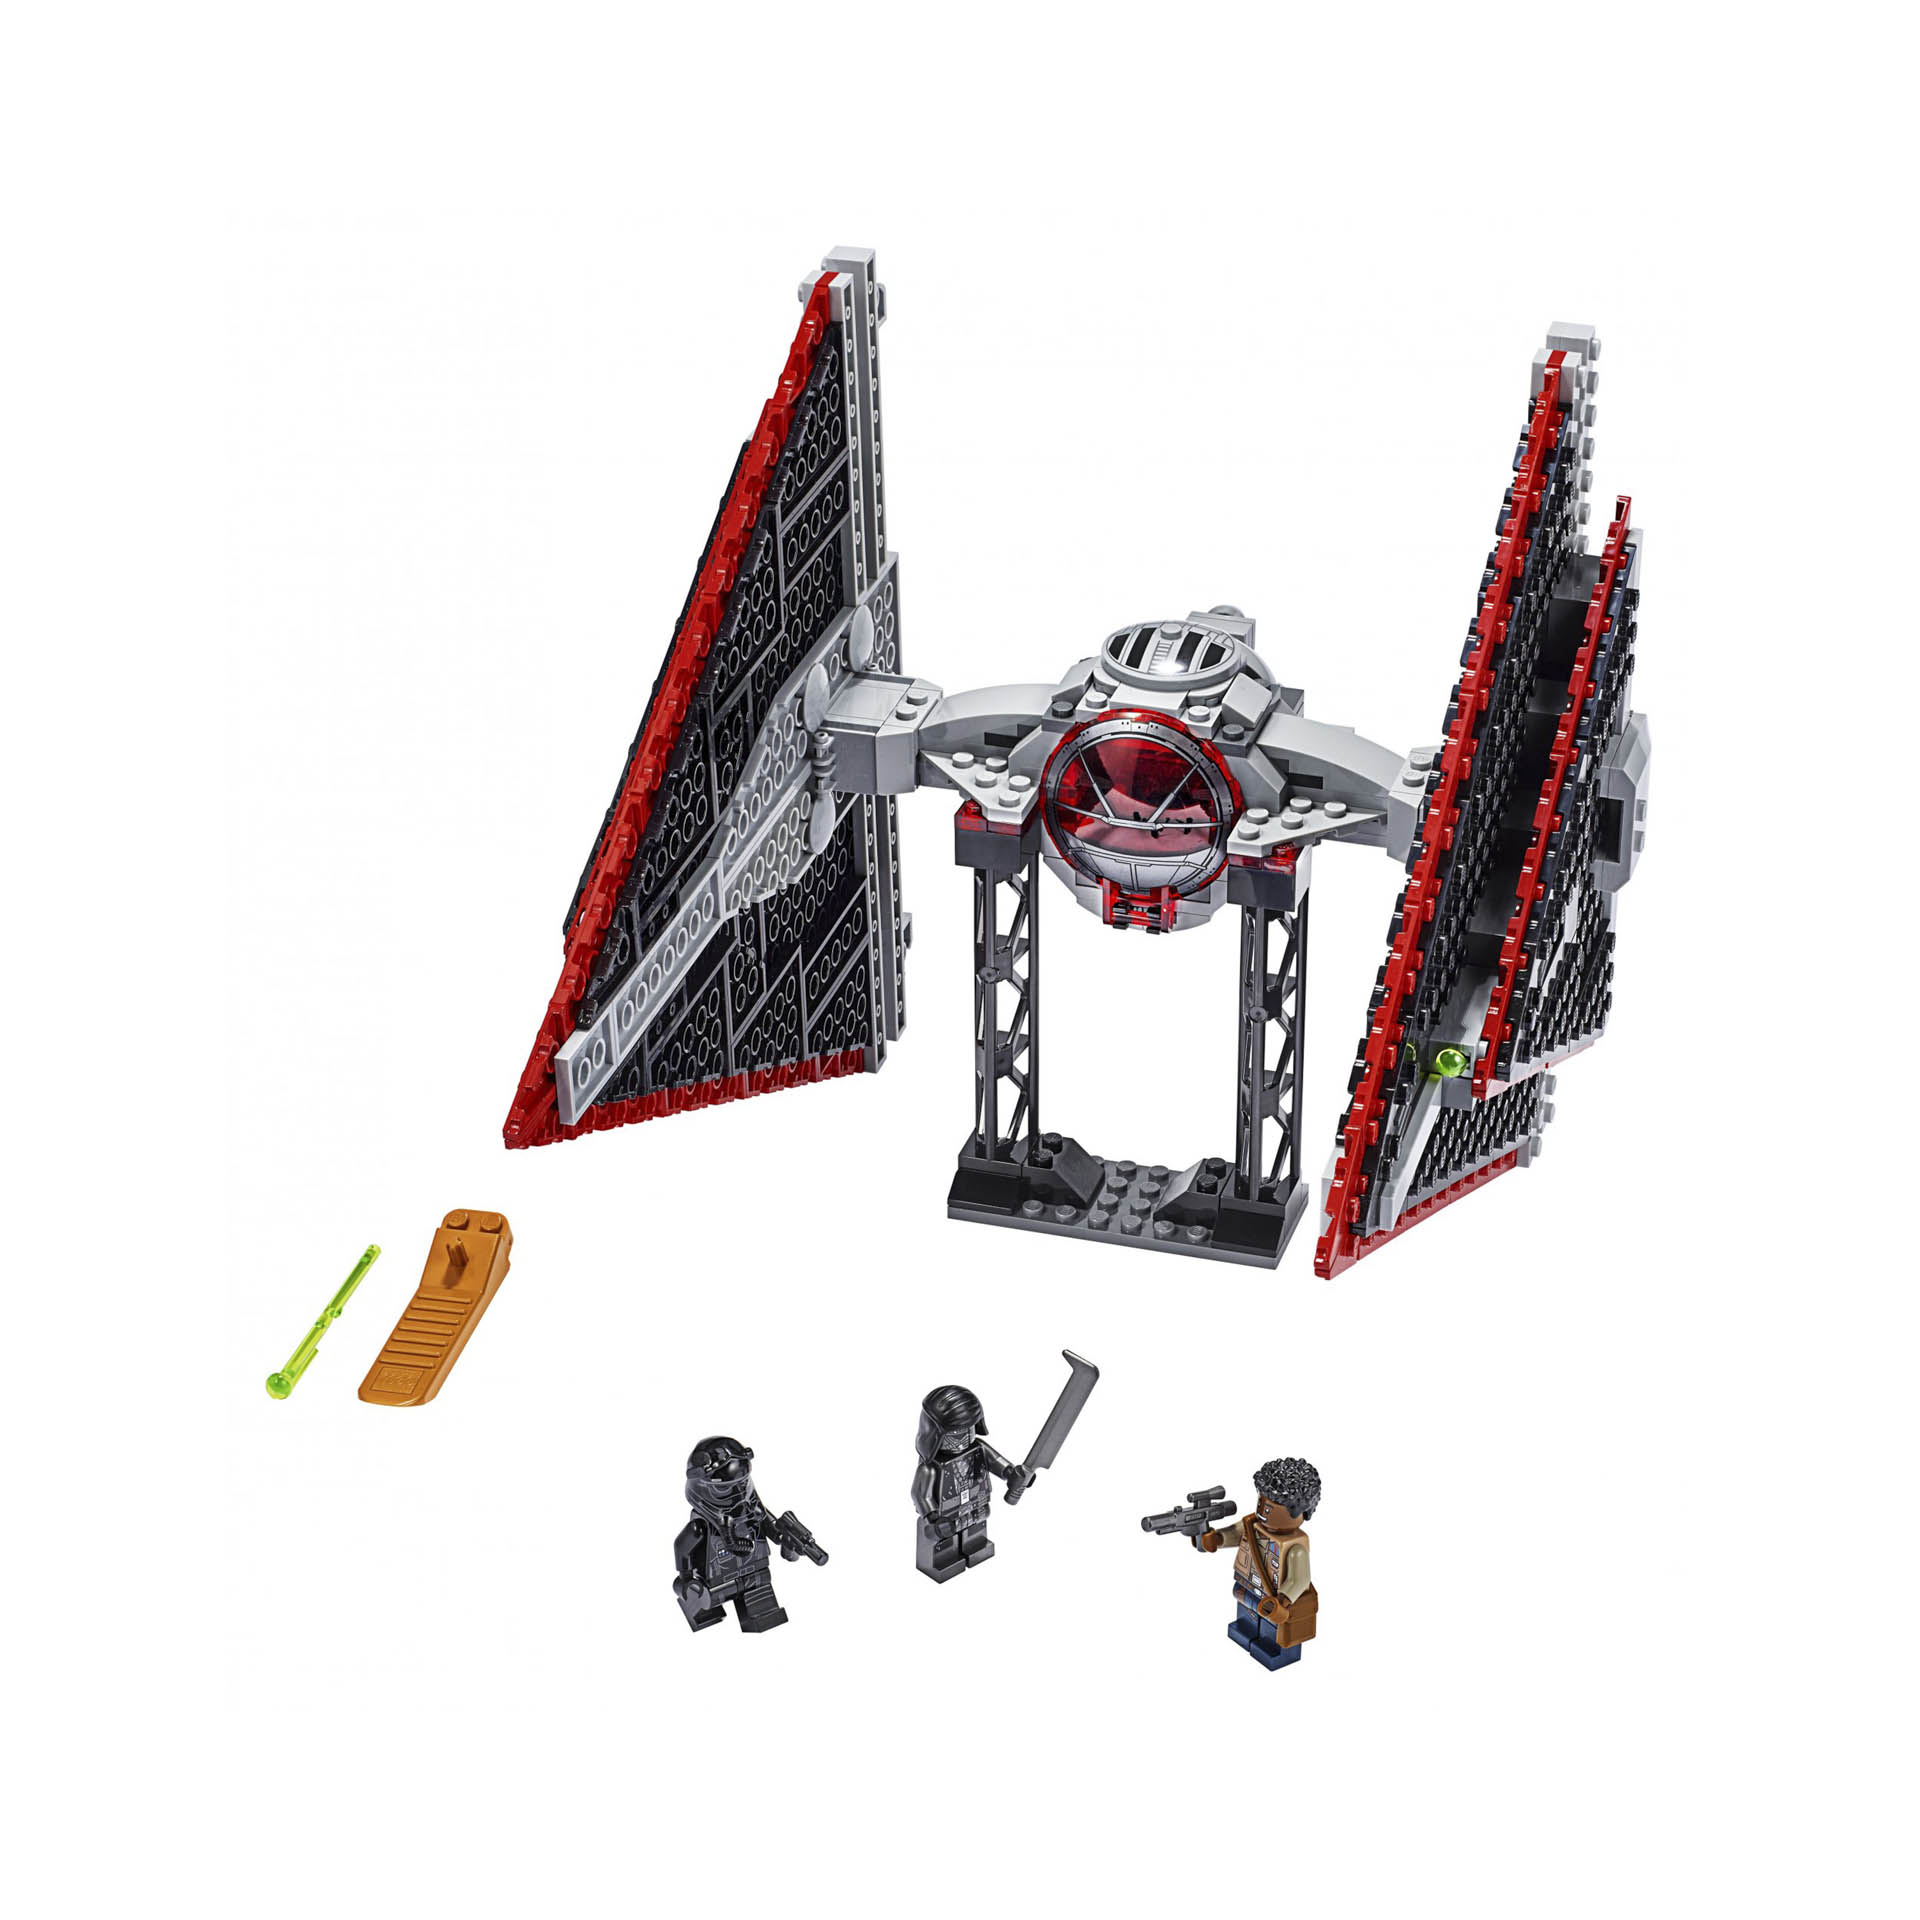 Sith TIE Fighter 75272, , large